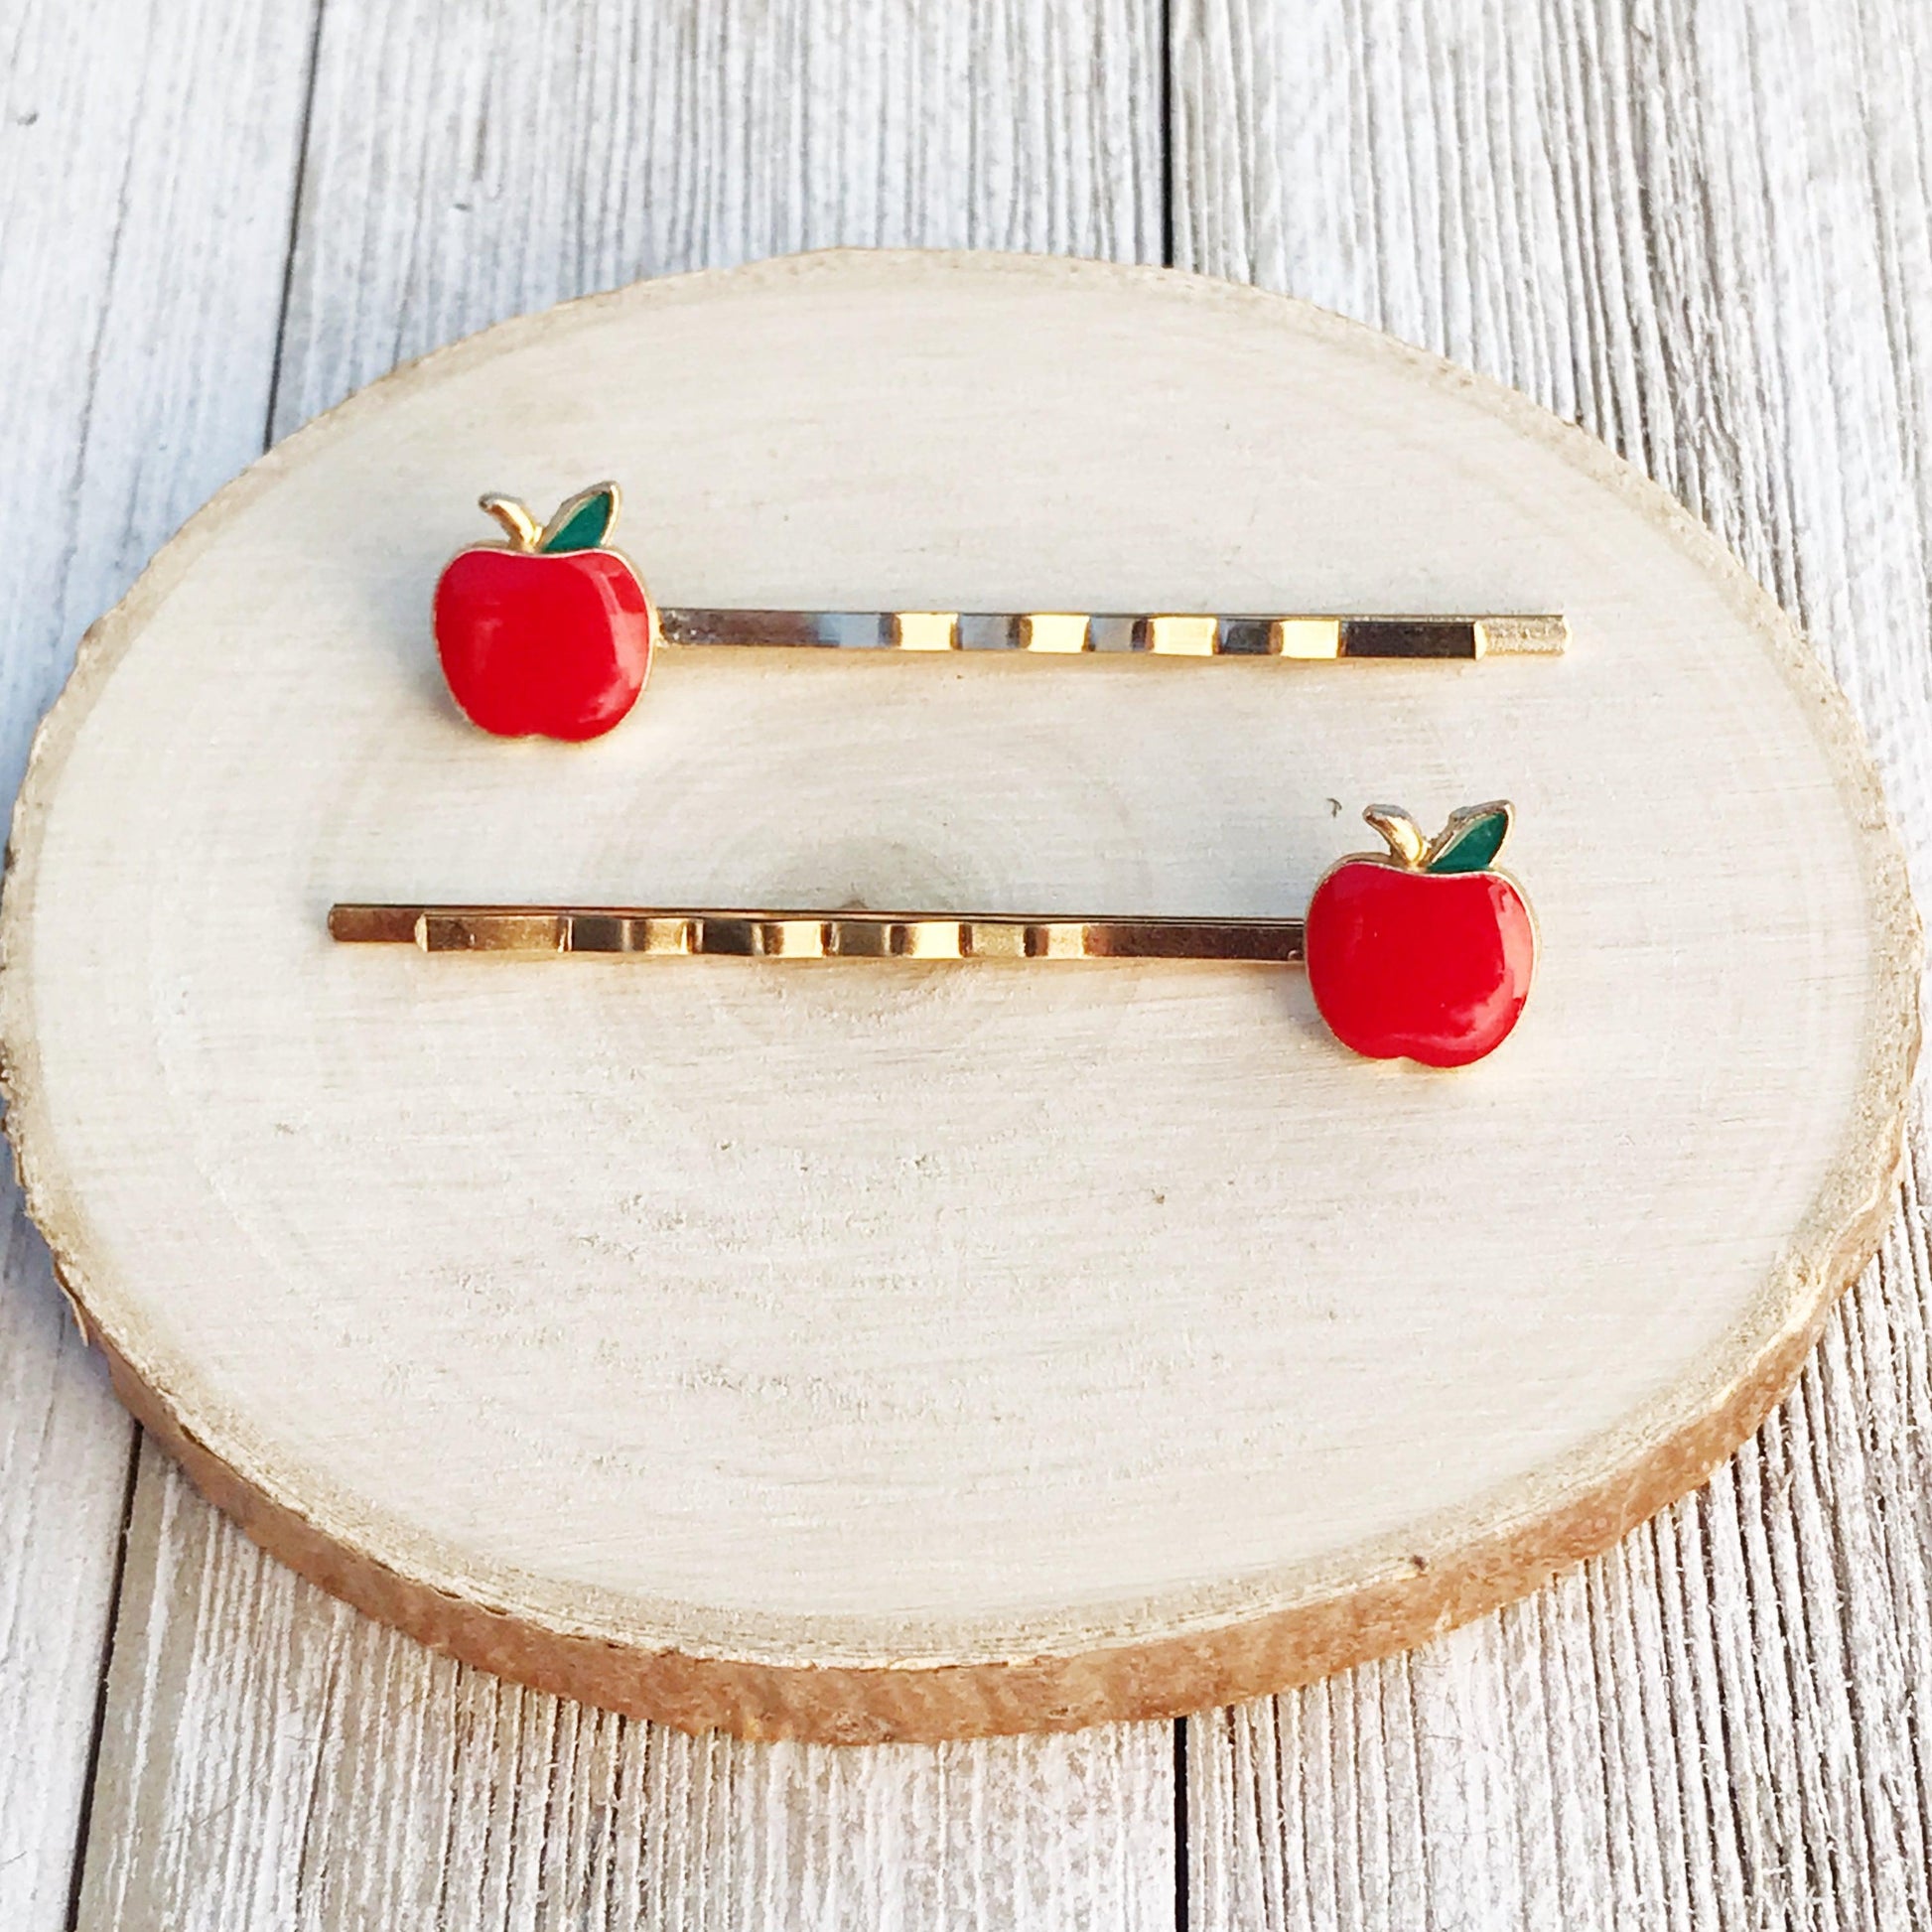 Red Apple Fruit Enamel Bobby Pins - Fun & Whimsical Hair Accessories